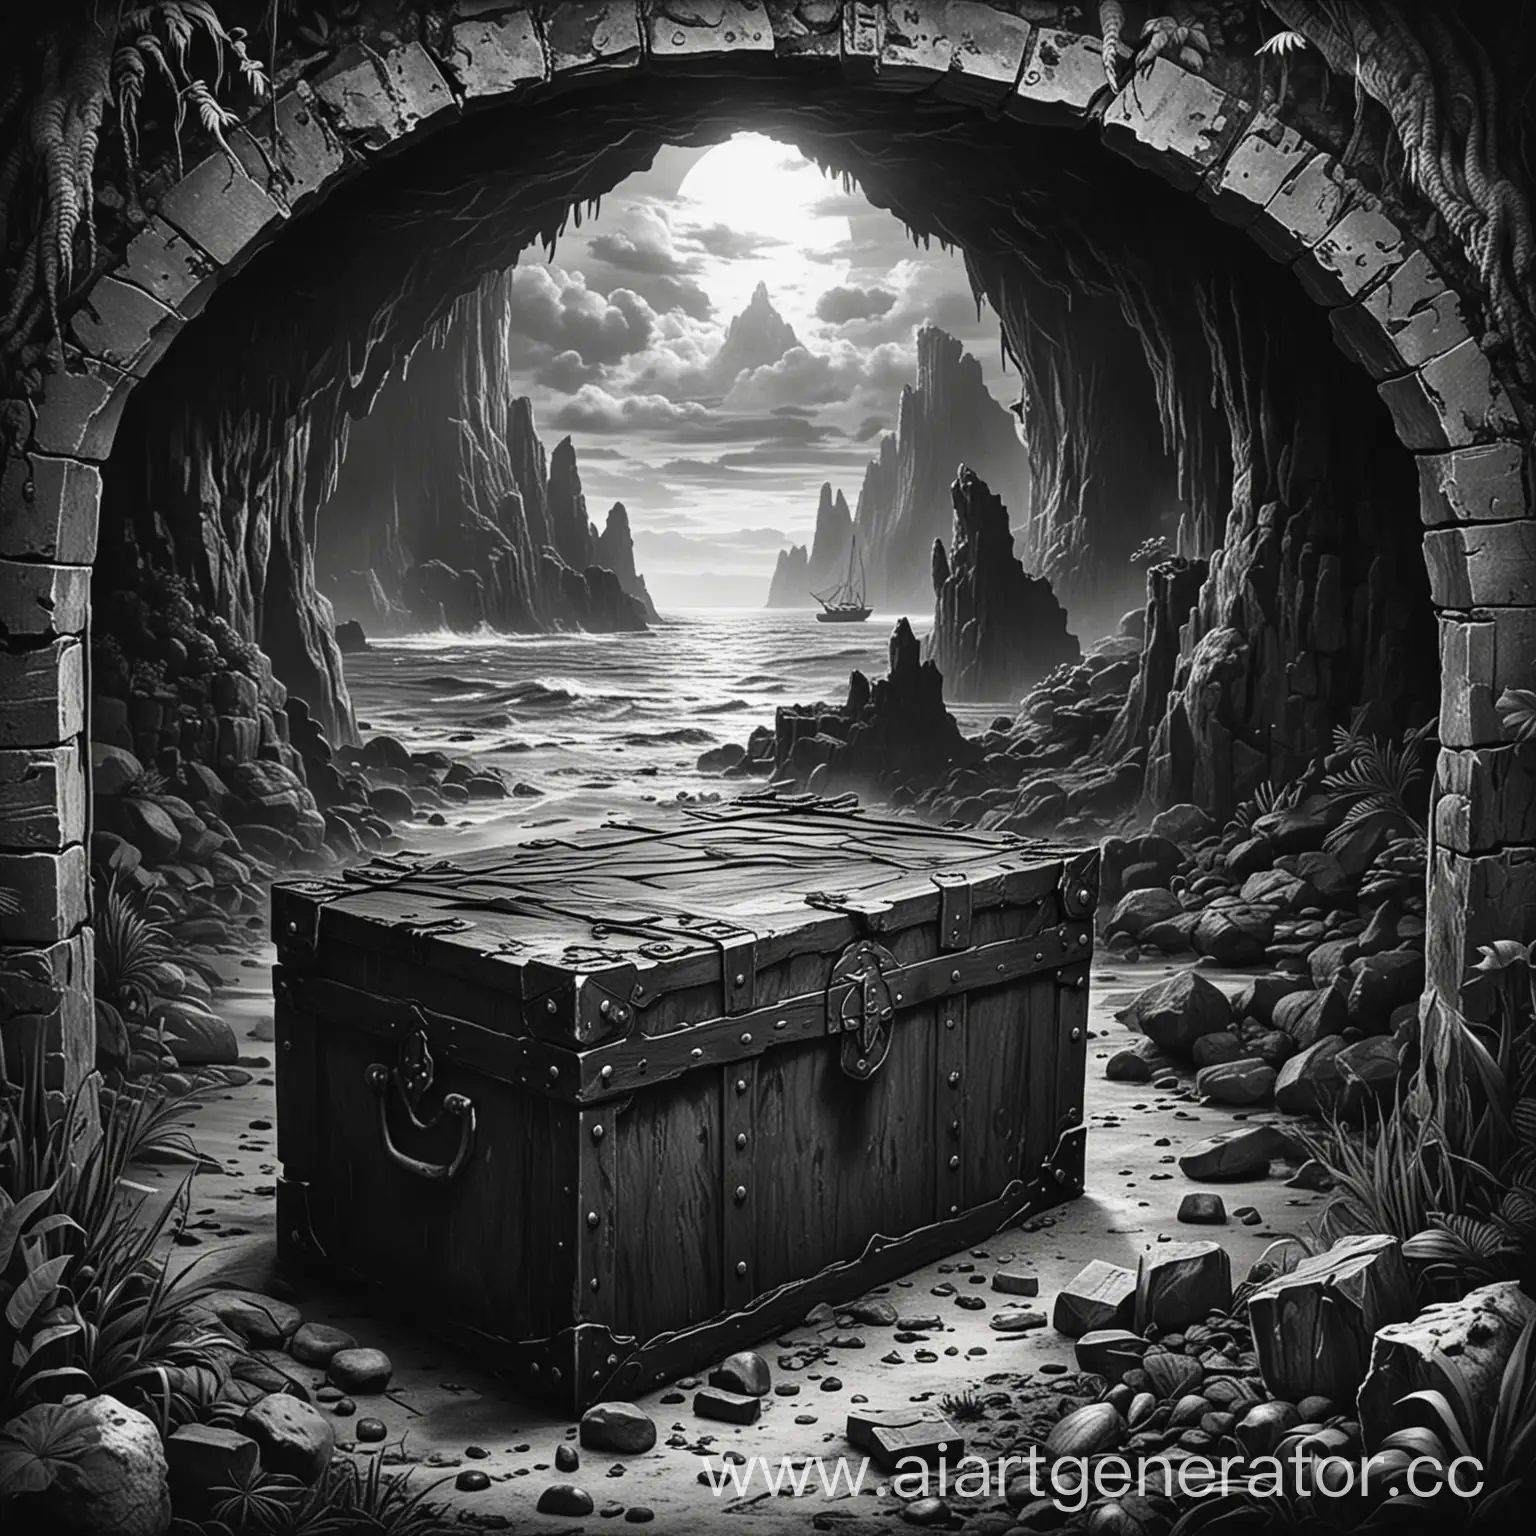 We need the reverse side of the card in a tabletop card game with a theme of a mysterious island, the card is called 'Chests,' the card should be black and white.